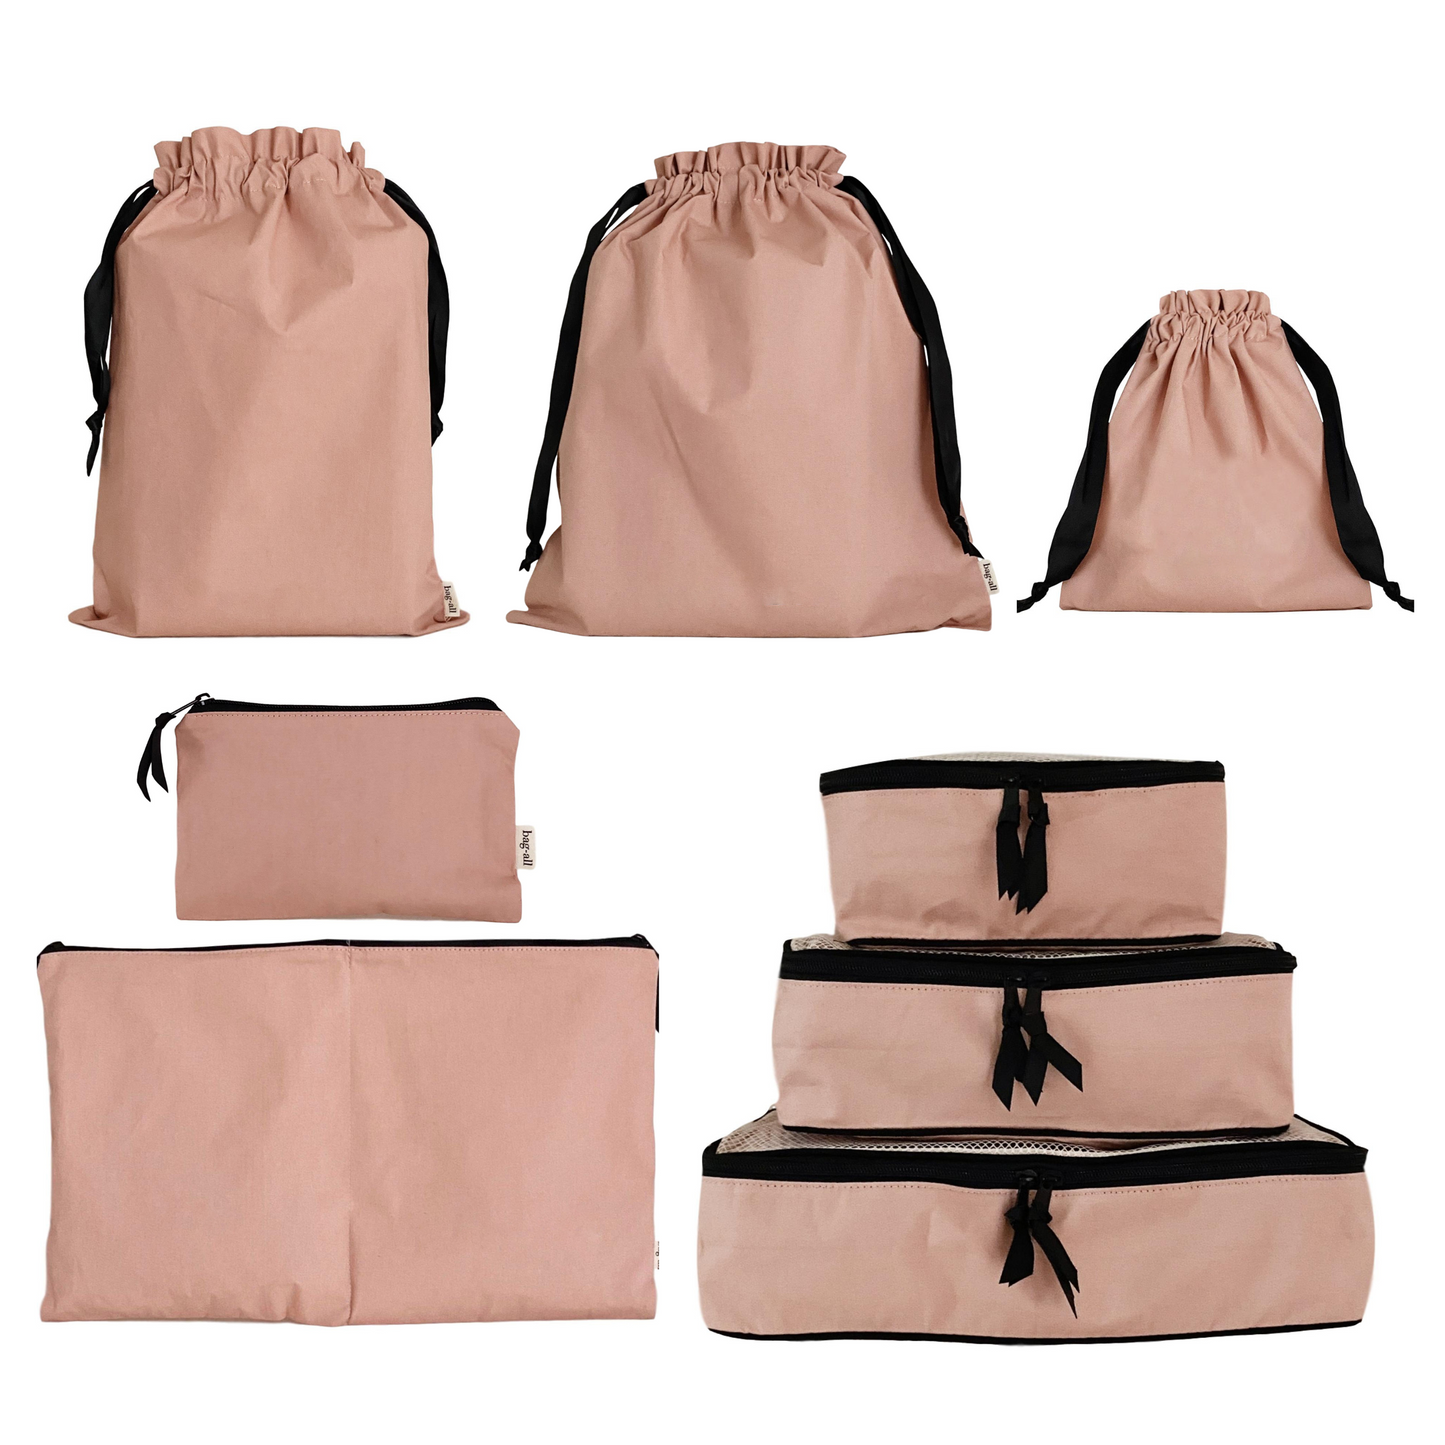 Travel Packing Organizers in High Quality Cotton, 8-Pack Pink/Blush | Bag-all